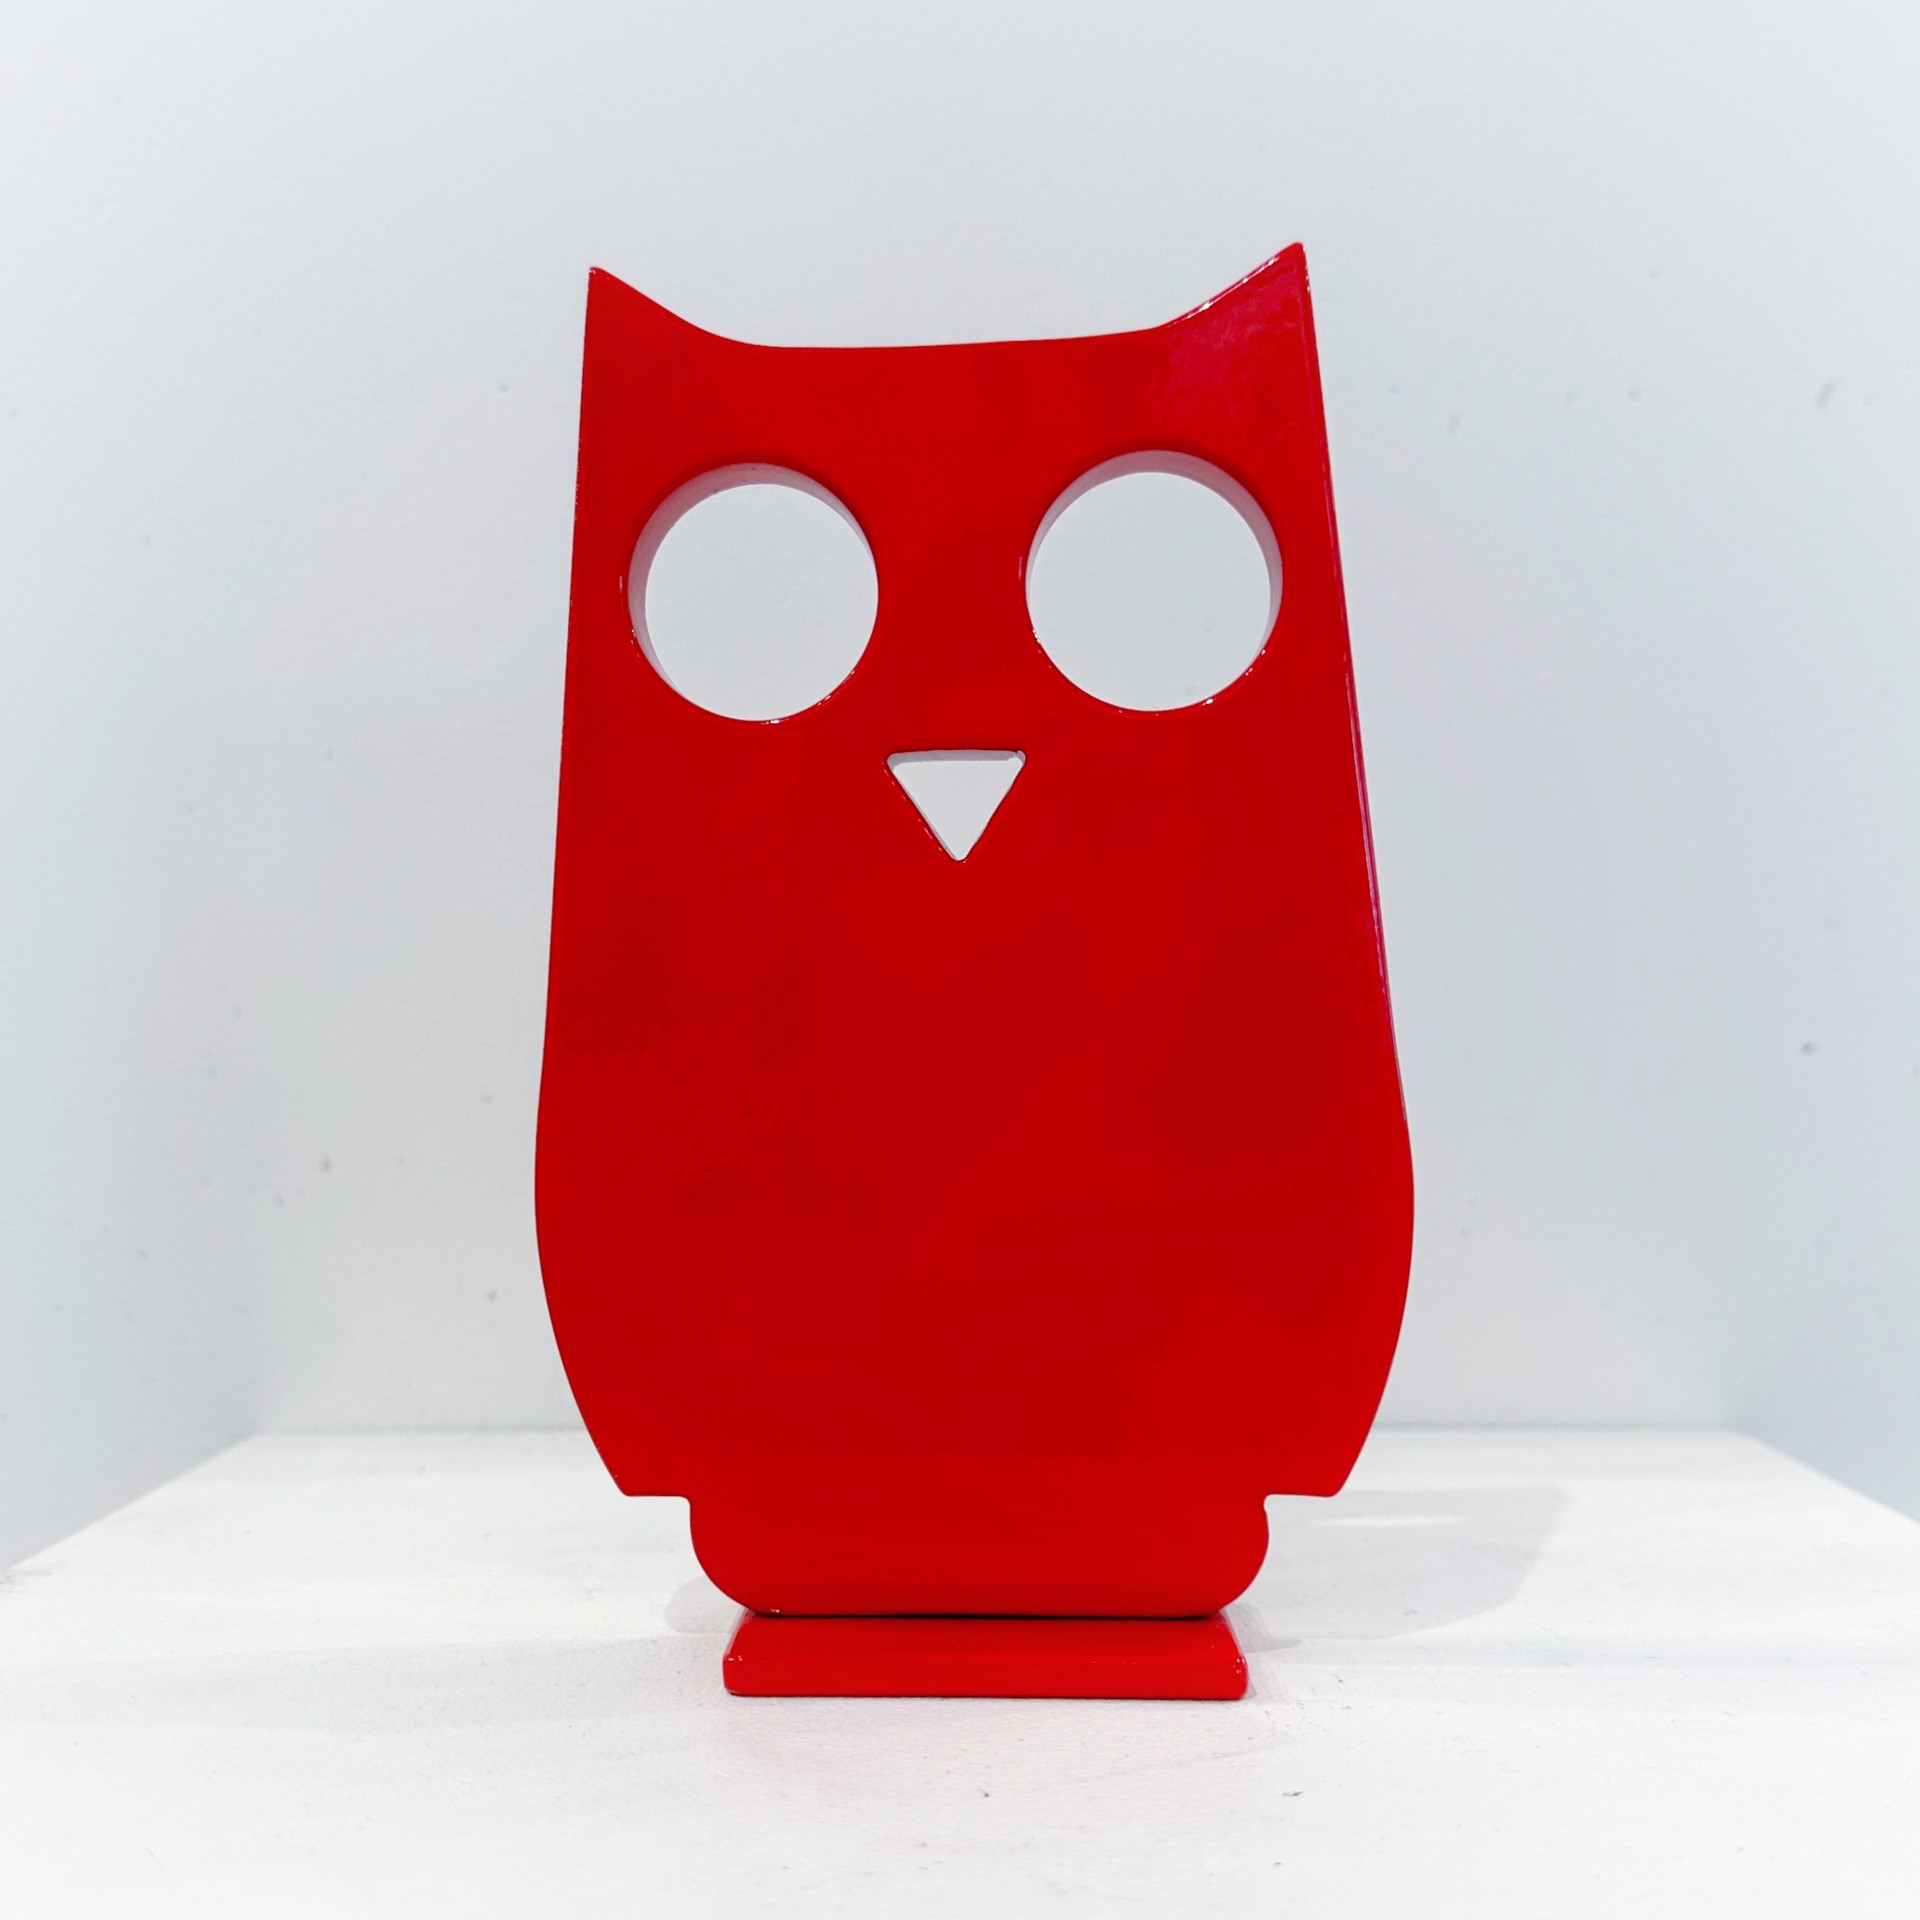 Aluminium Sculpture By Jeffie Brewer Featuring An Owl In Simplified Shapes And Red Finish